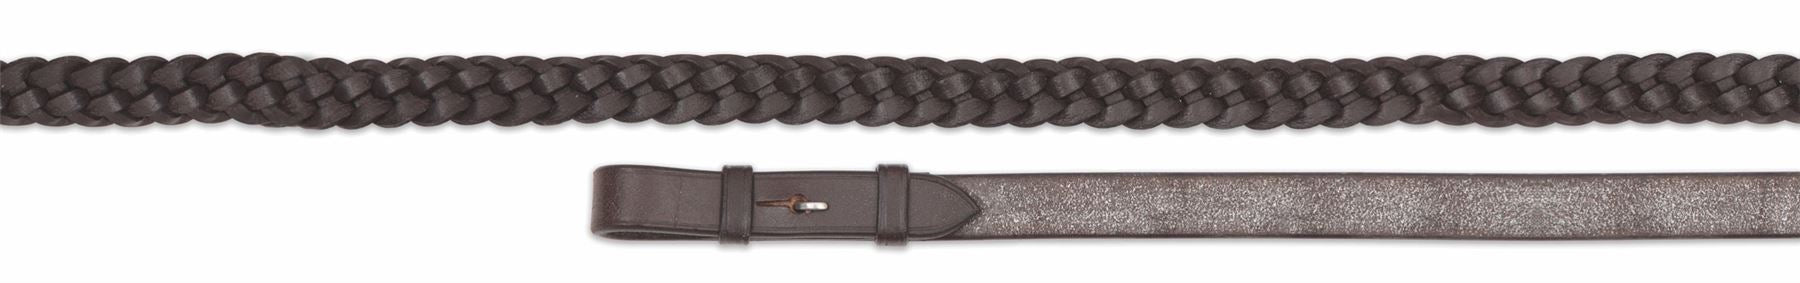 Shires Aviemore Plaited Leather Reins - Just Horse Riders